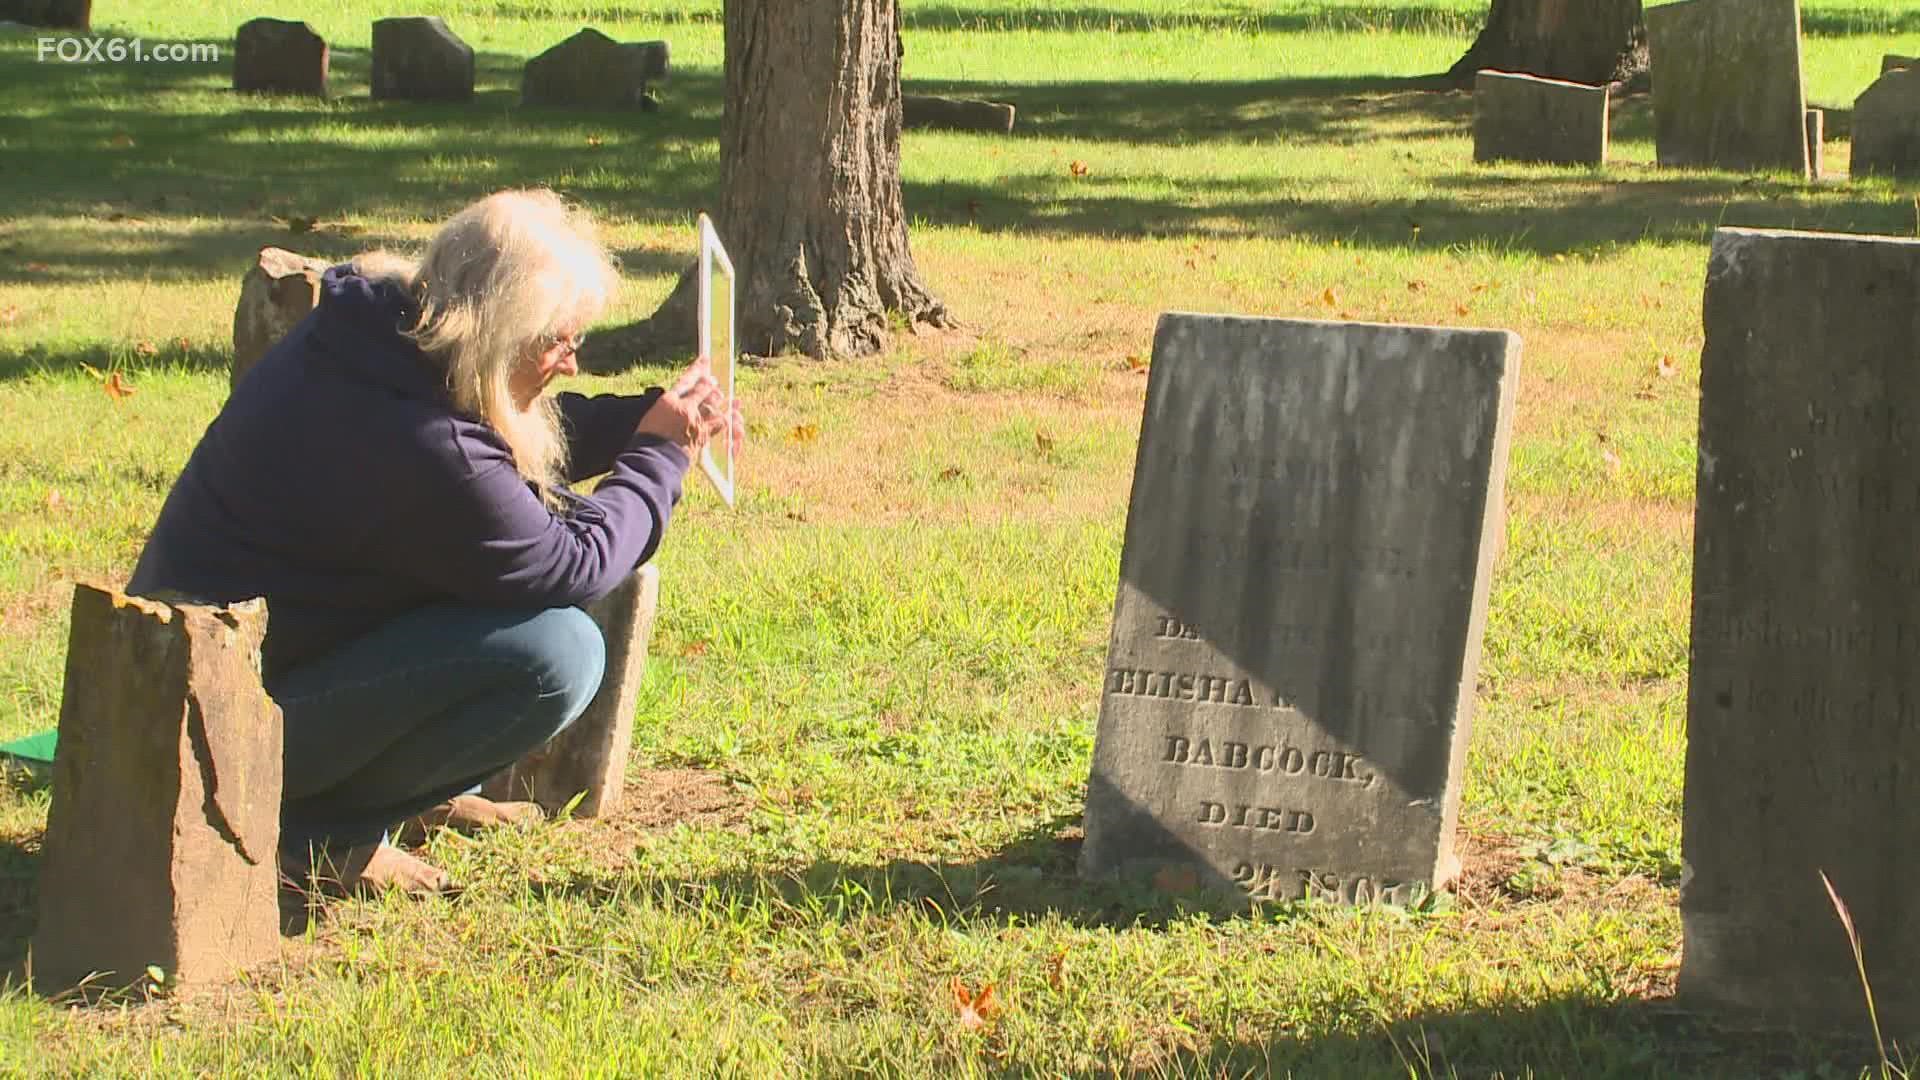 The Connecticut Gravestone Network is pushing for better upkeep and maintenance at these sites, some of which date back to colonial and revolutionary times.